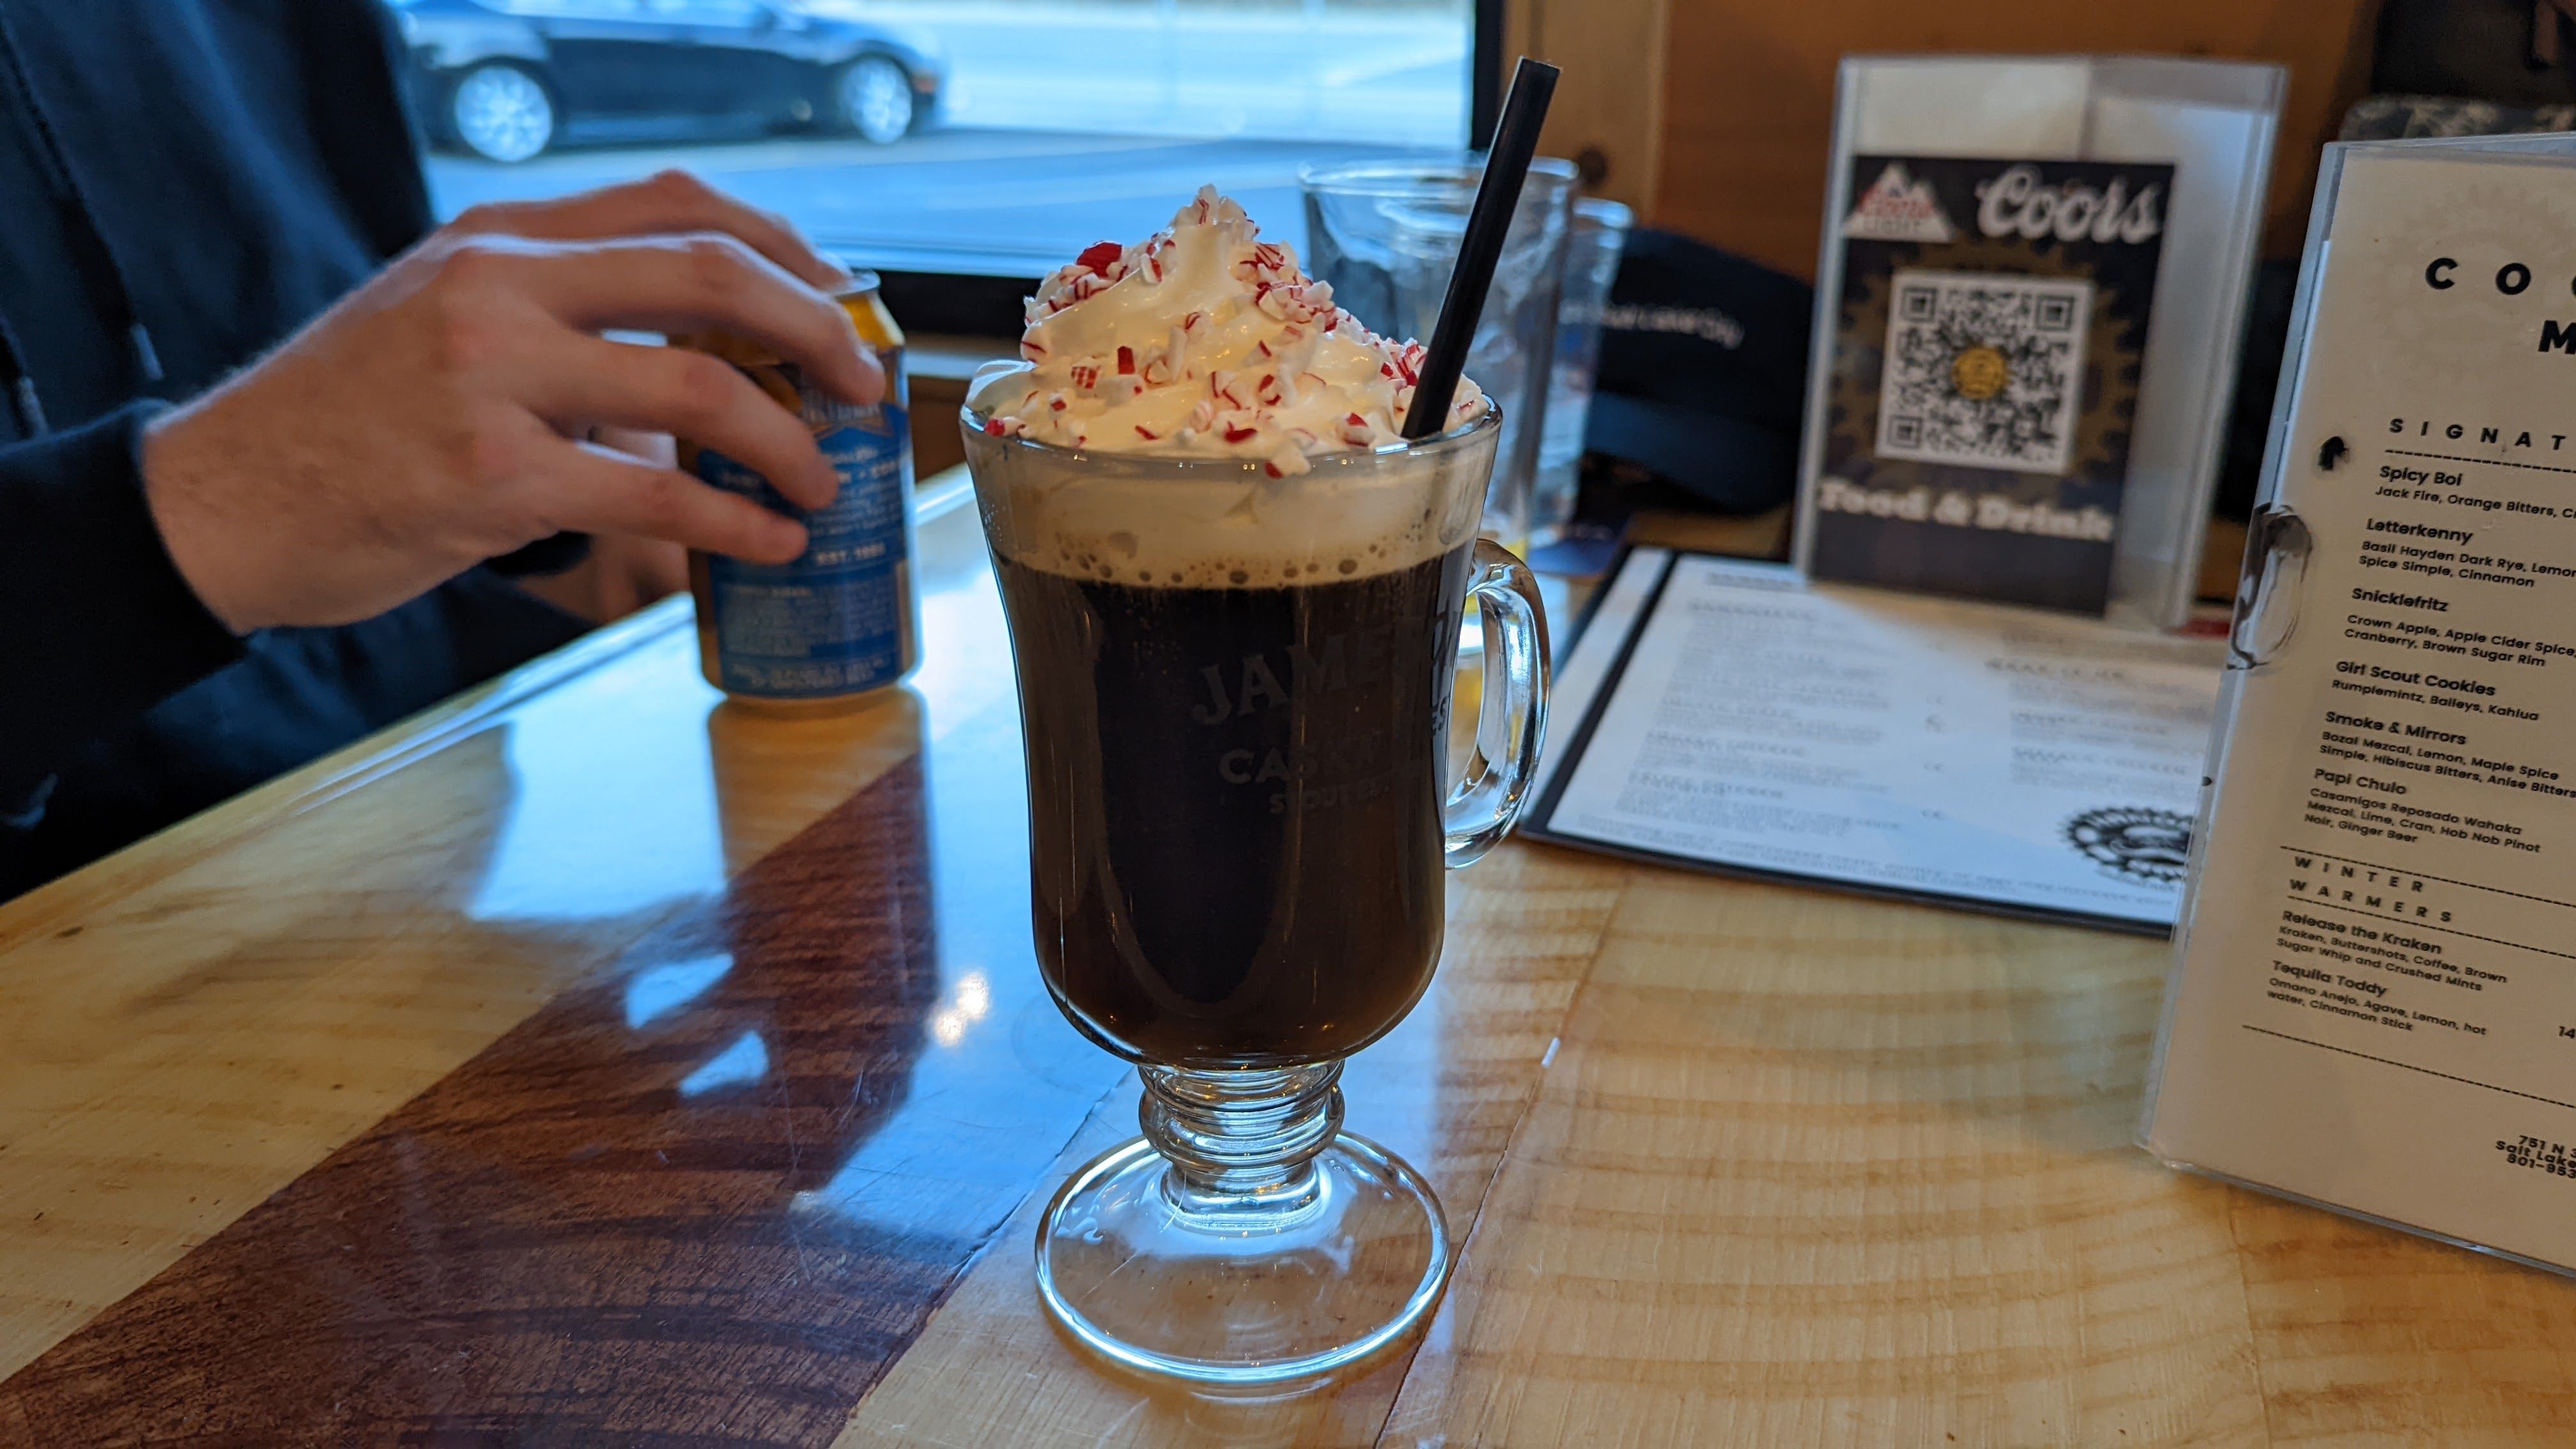 A coffee cocktail with whipped cream is on a table next to a man drinking beer.